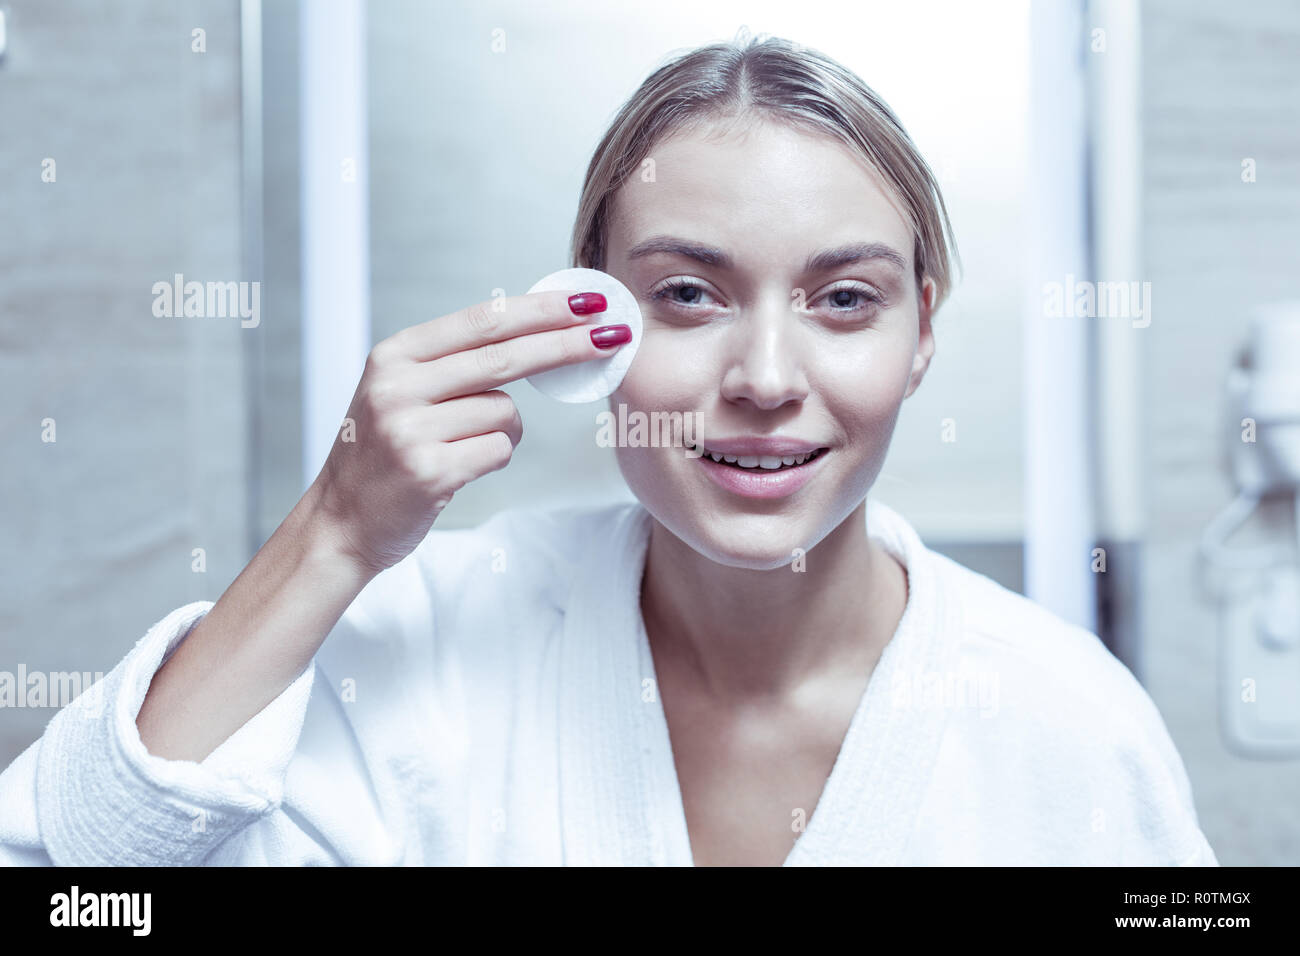 Blue-eyed good-looking woman removing makeup from face with cotton pad ...